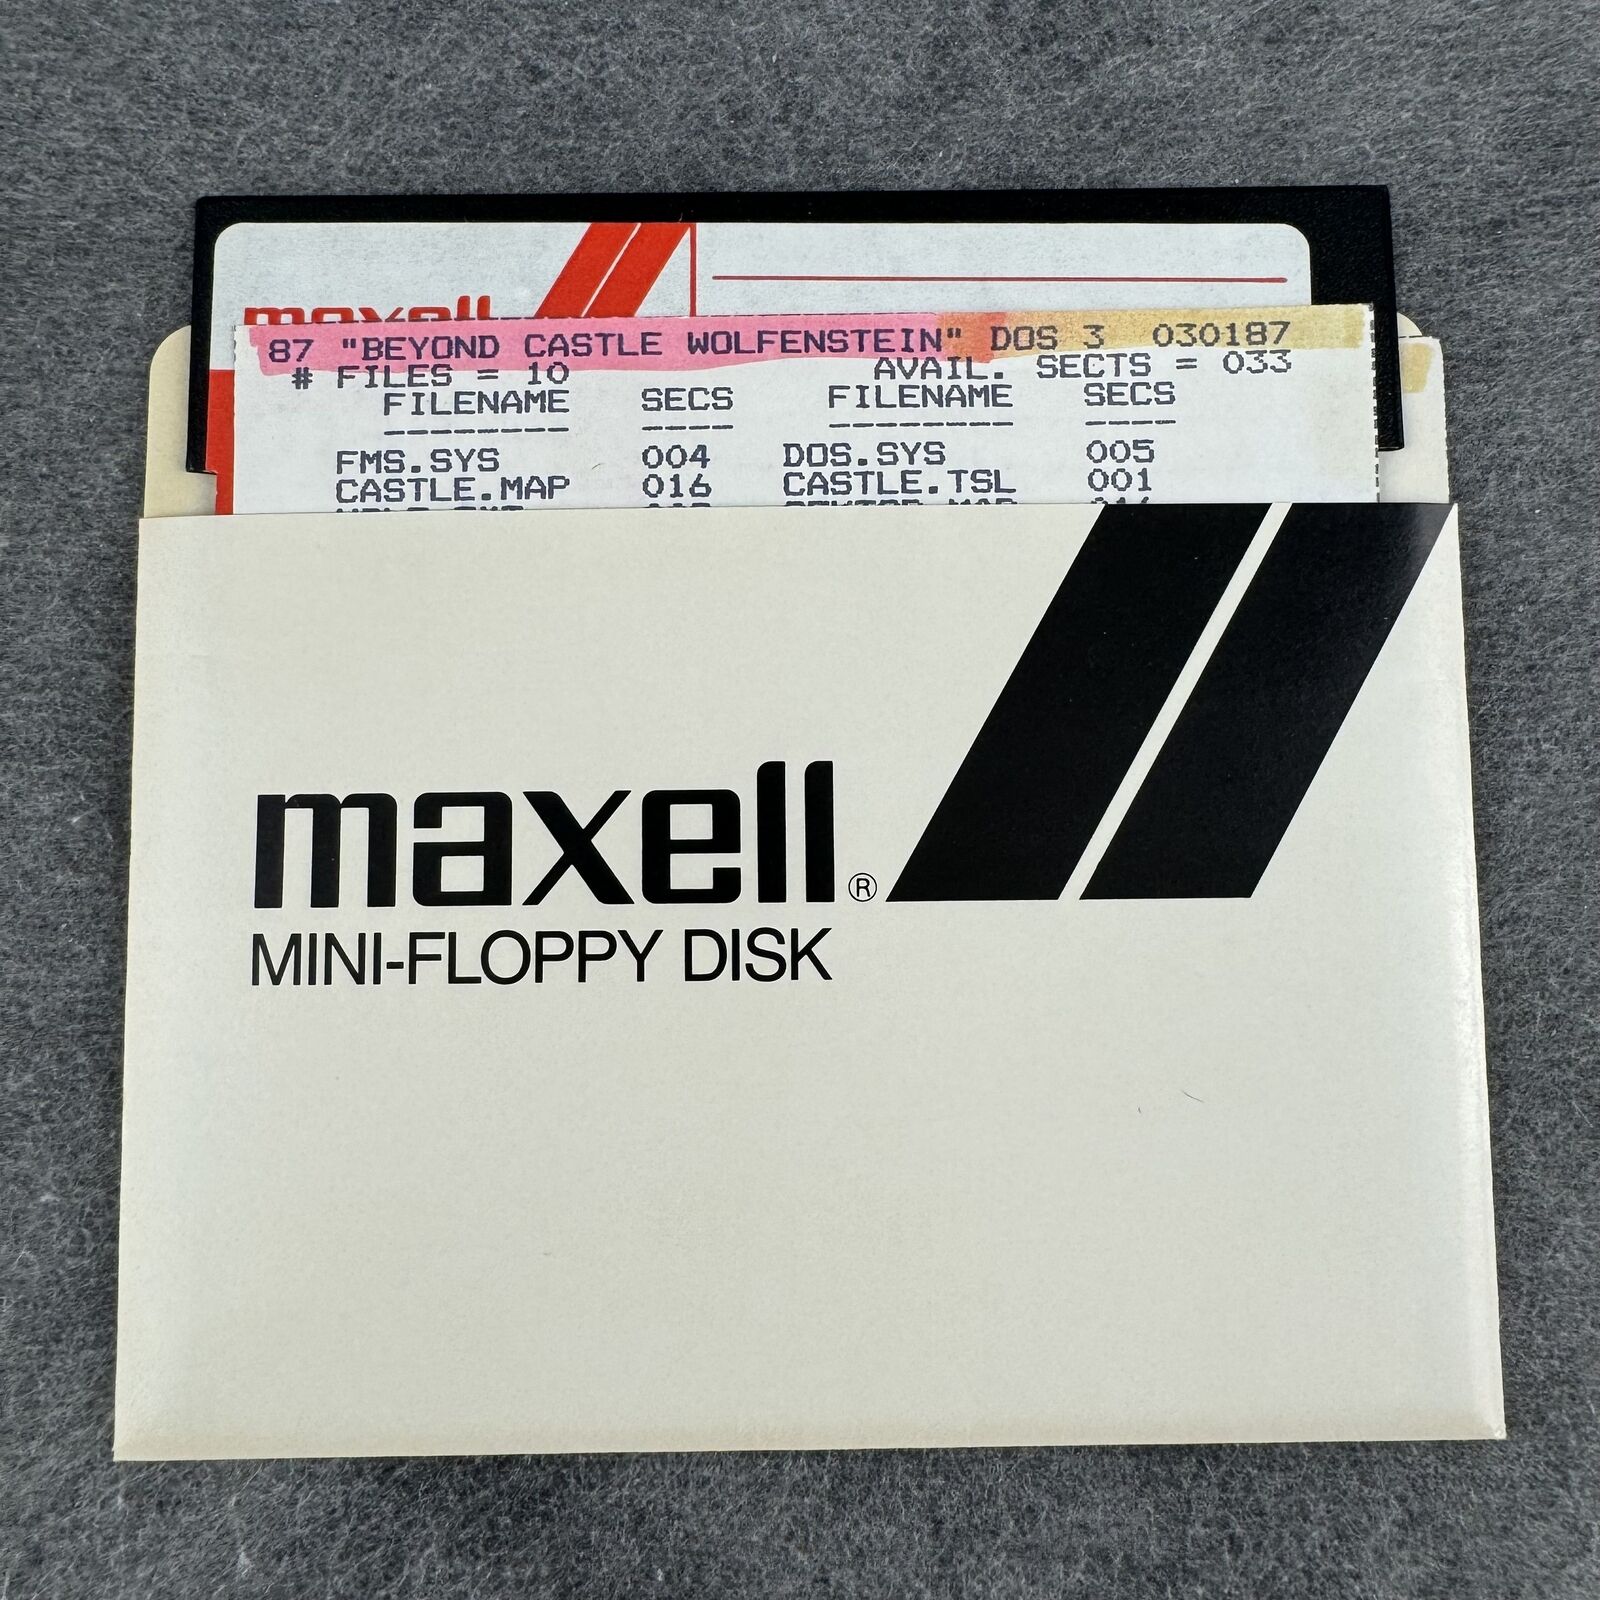 Vintage Computer Floppy Disk - Estate Find, Collector\'s Item, Untested, As-Is